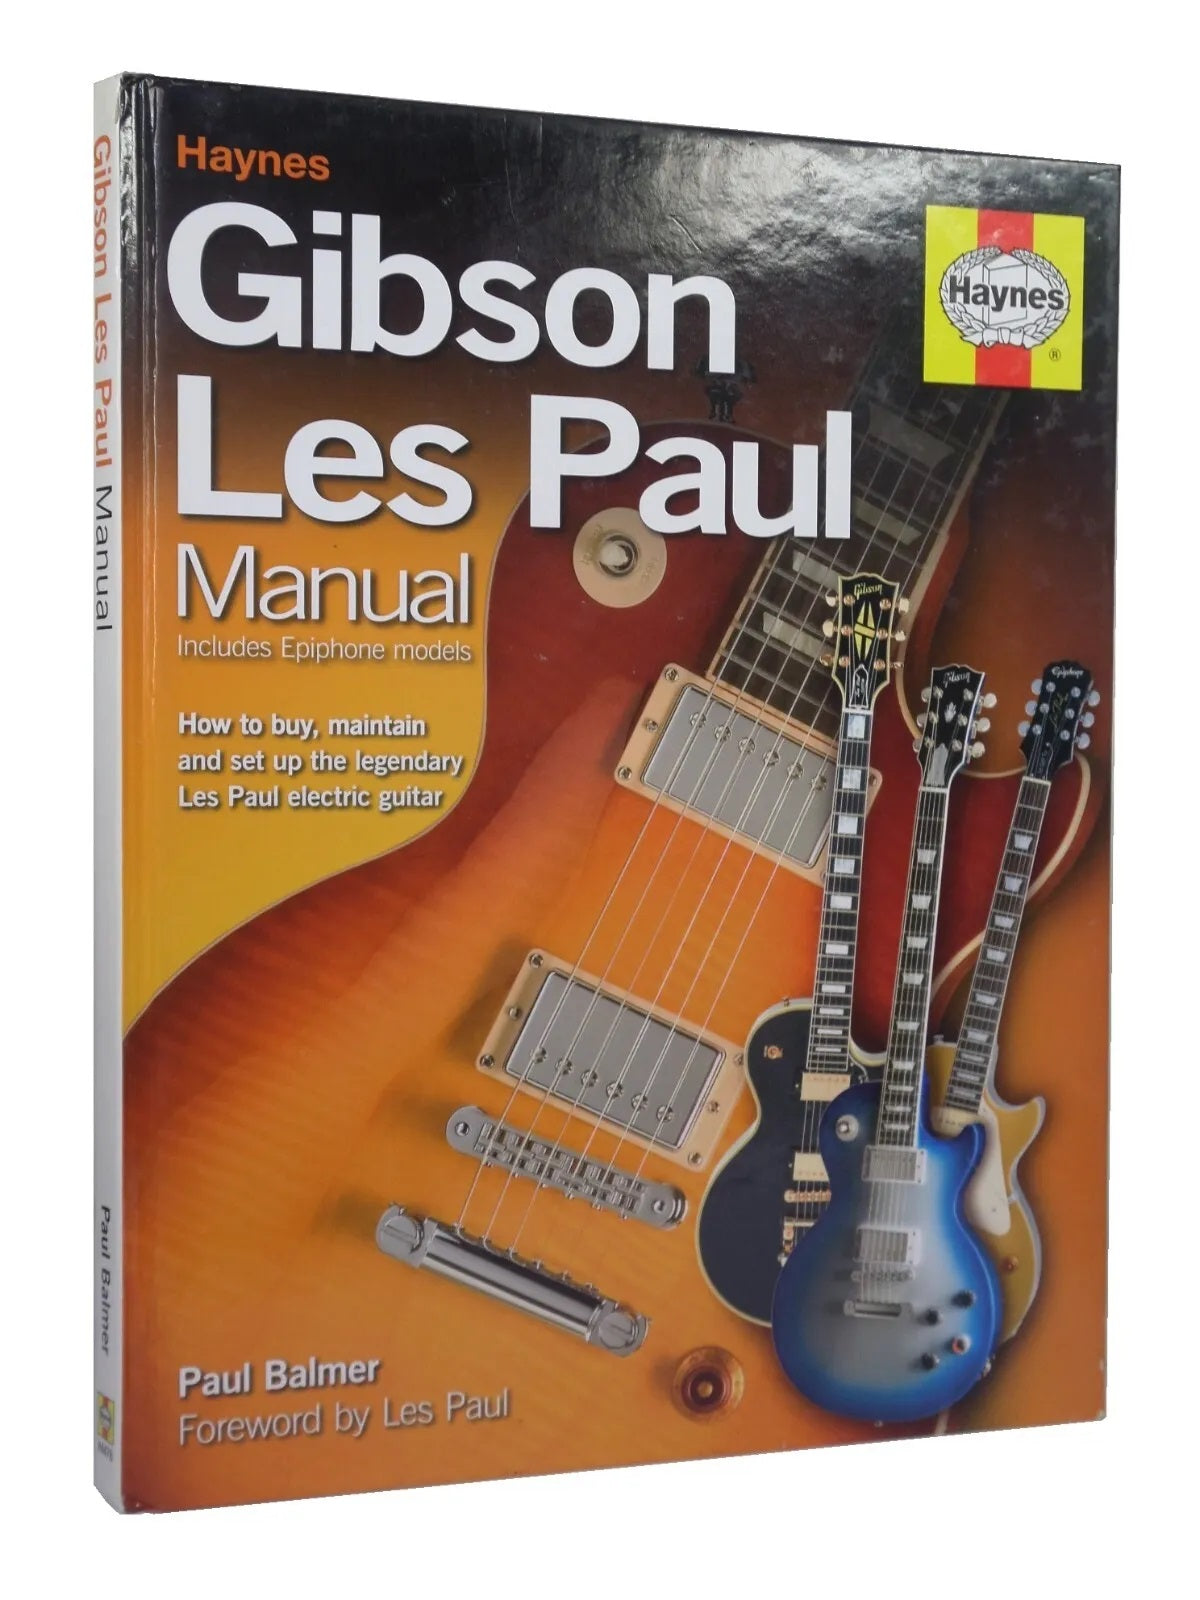 GIBSON LES PAUL MANUAL: HOW TO BUY, MAINTAIN AND SET UP... 2008 HARDCOVER